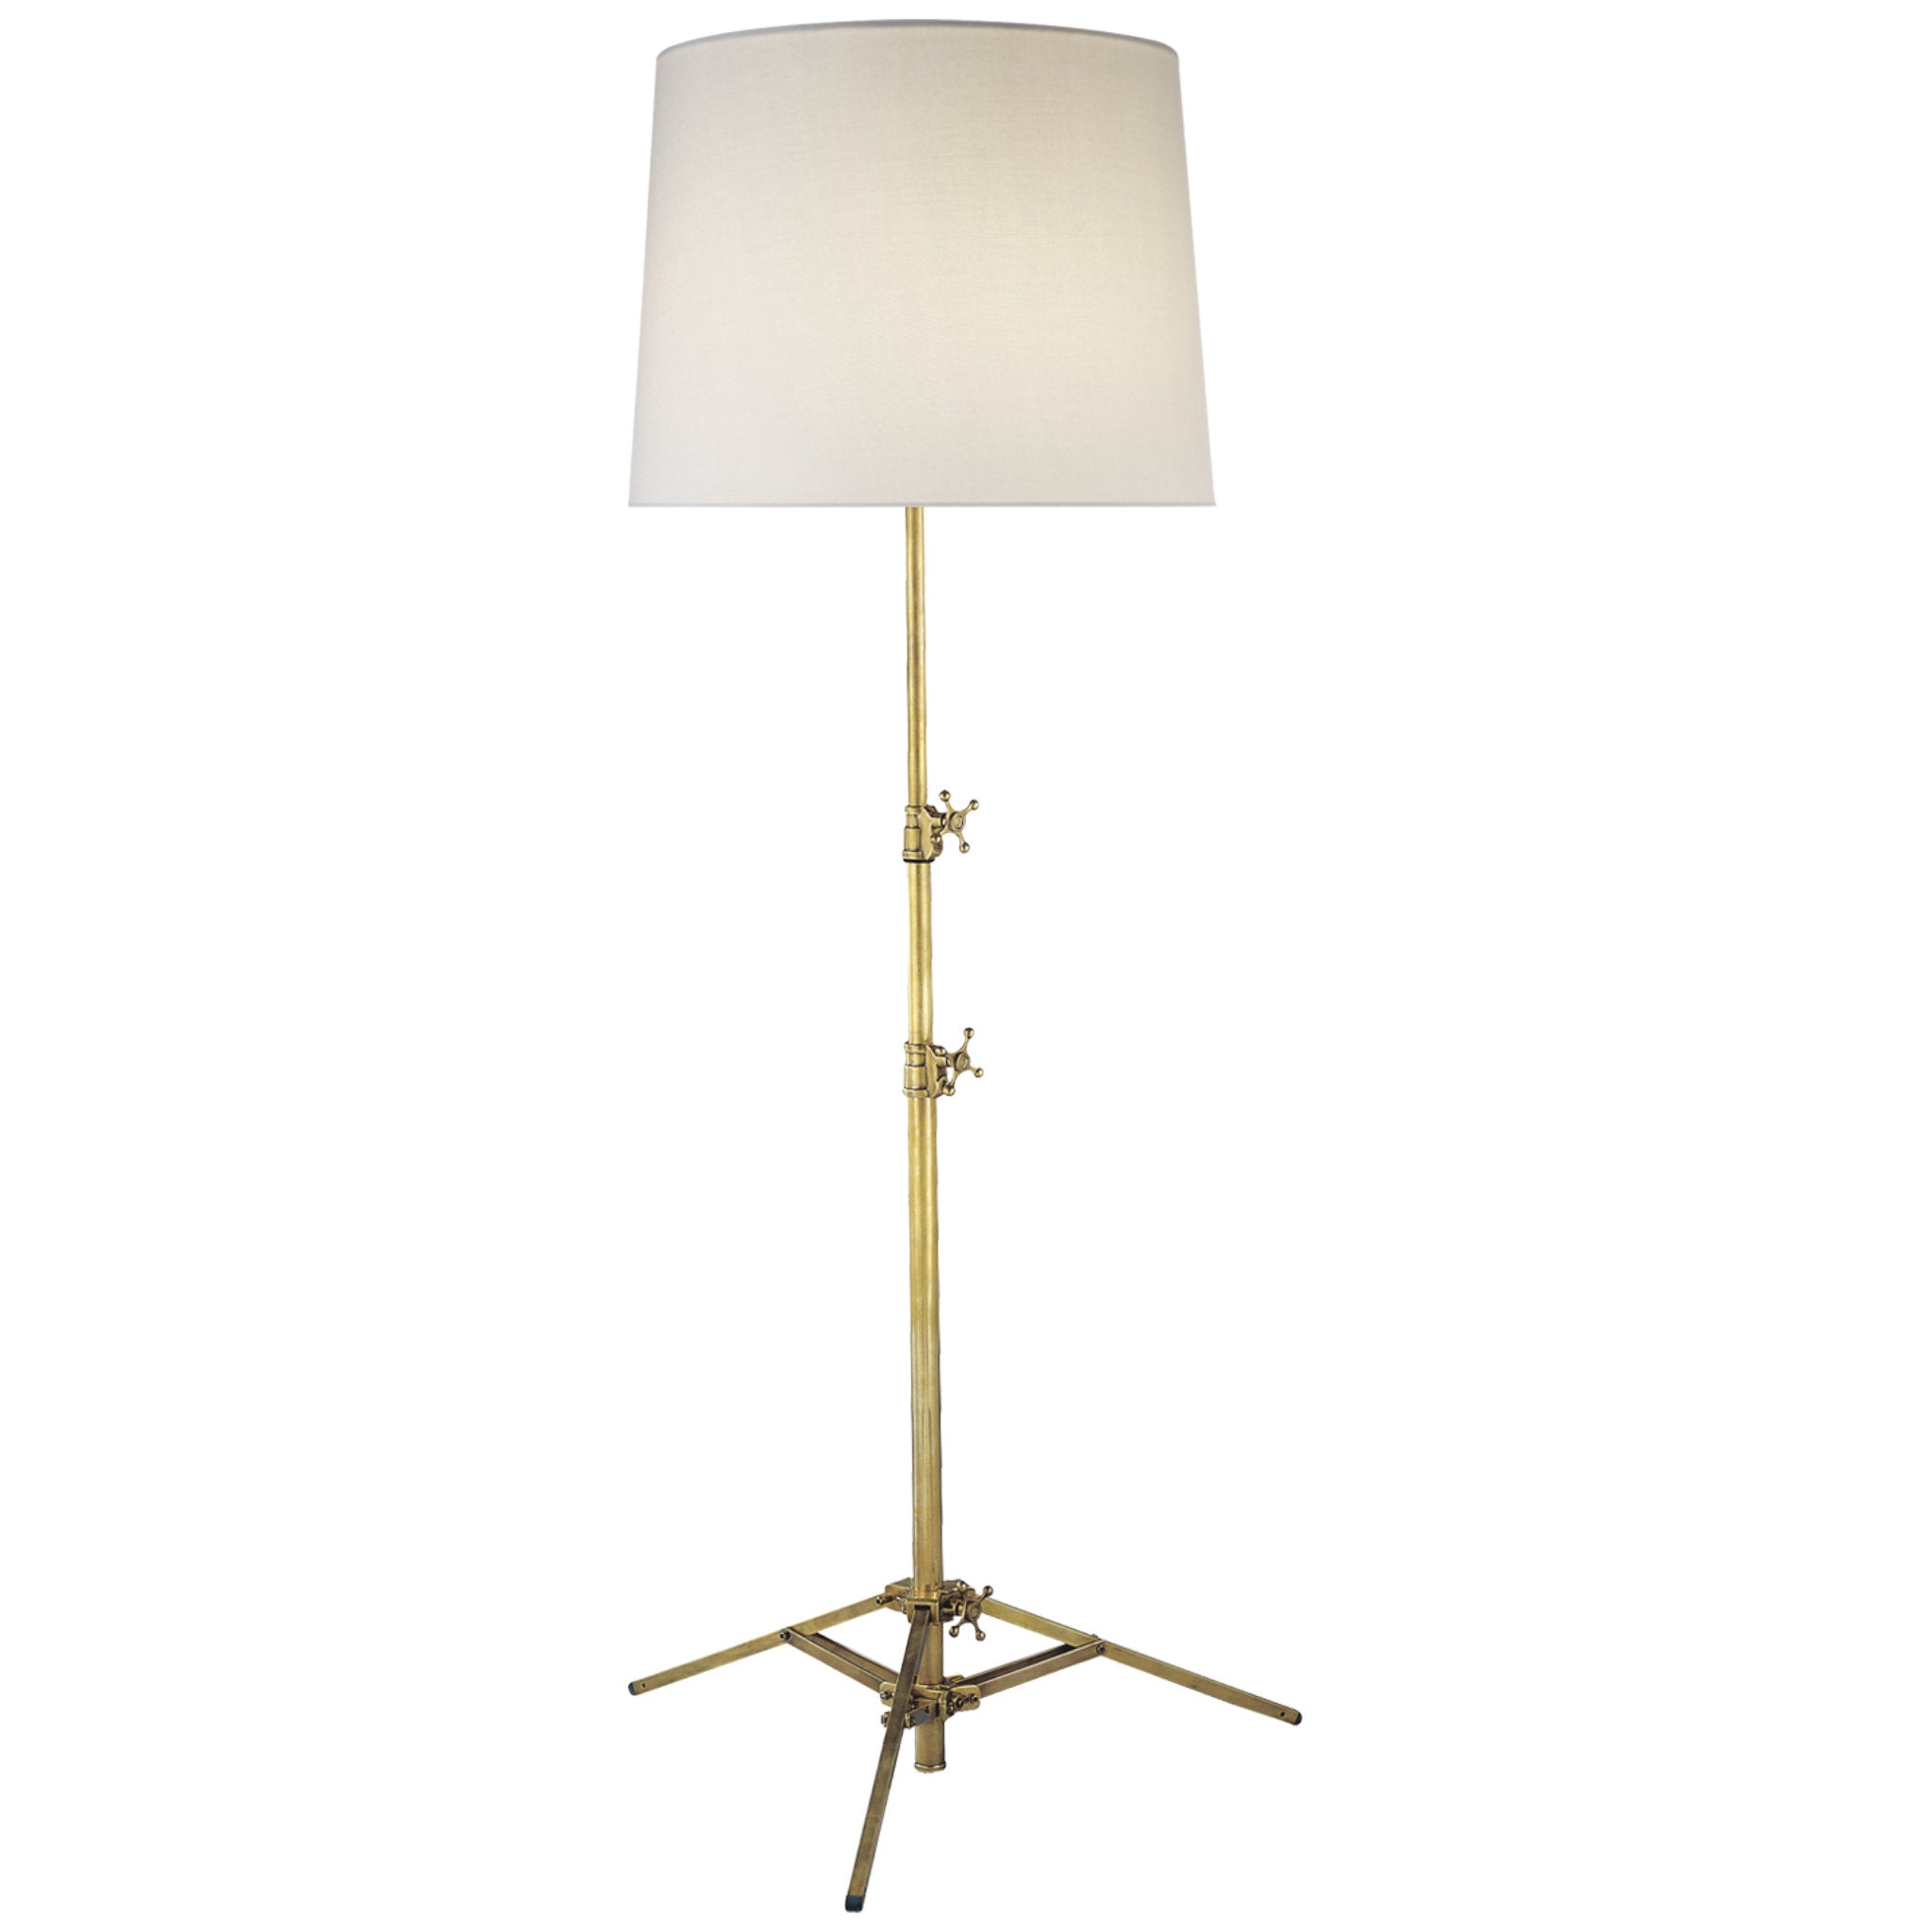 Thomas O'Brien Studio Floor Lamp in Hand-Rubbed Antique Brass with Linen Shade